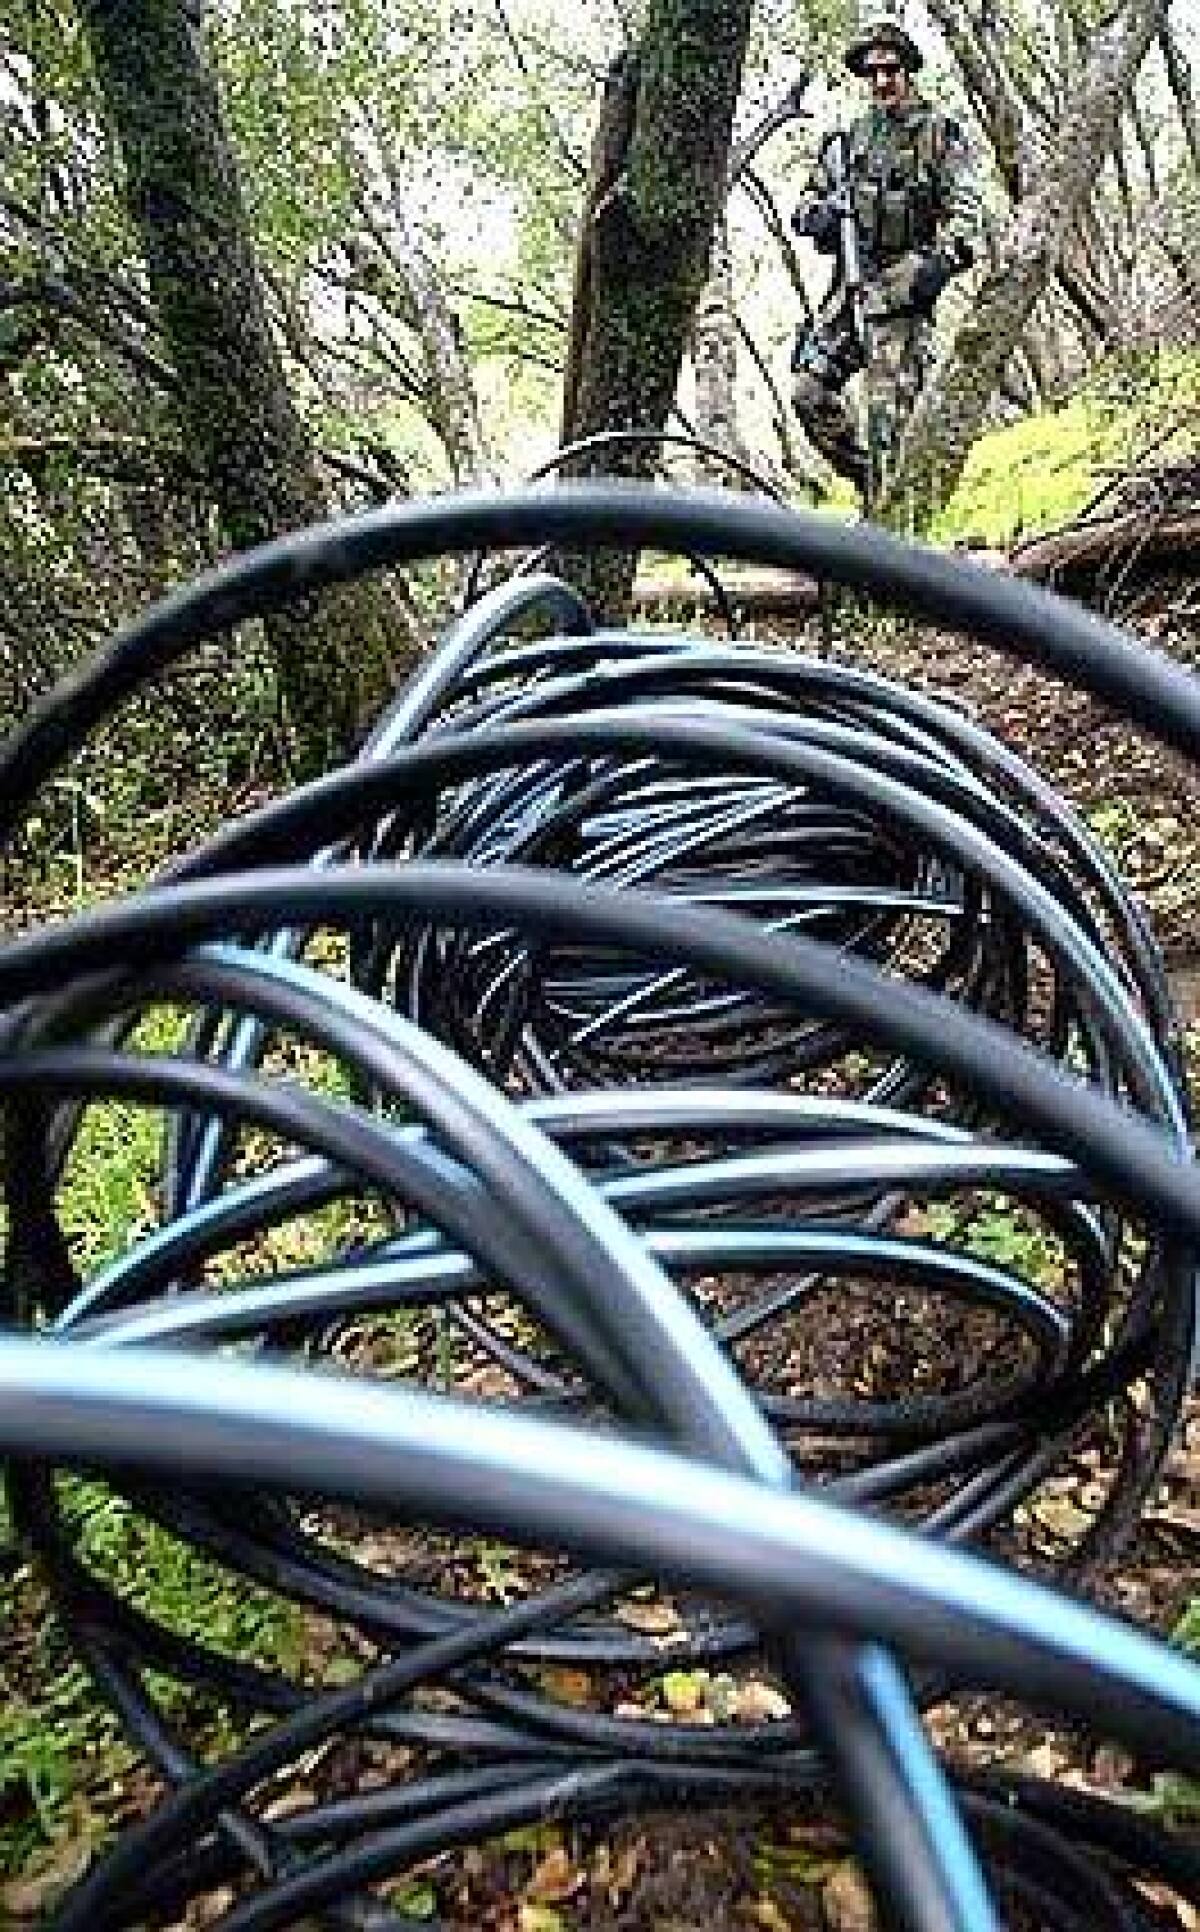 Coils of irrigation hose used by Sequoia pot growers.